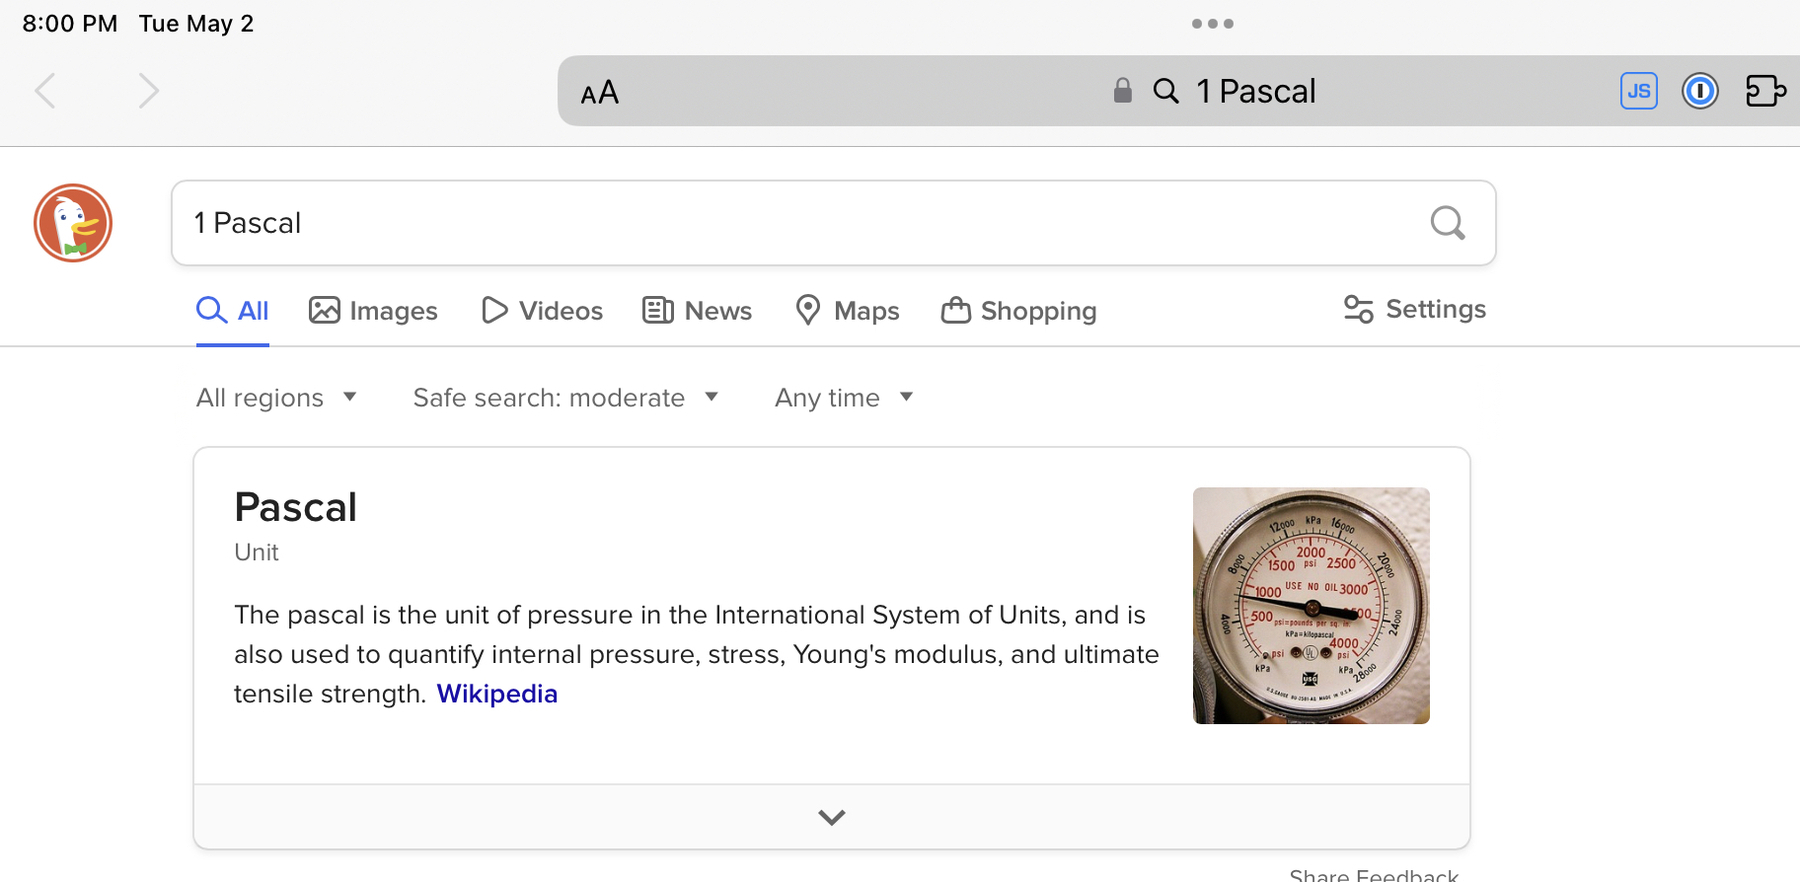 A screenshot of the DuckDuckGo search results for “1 Pascal”